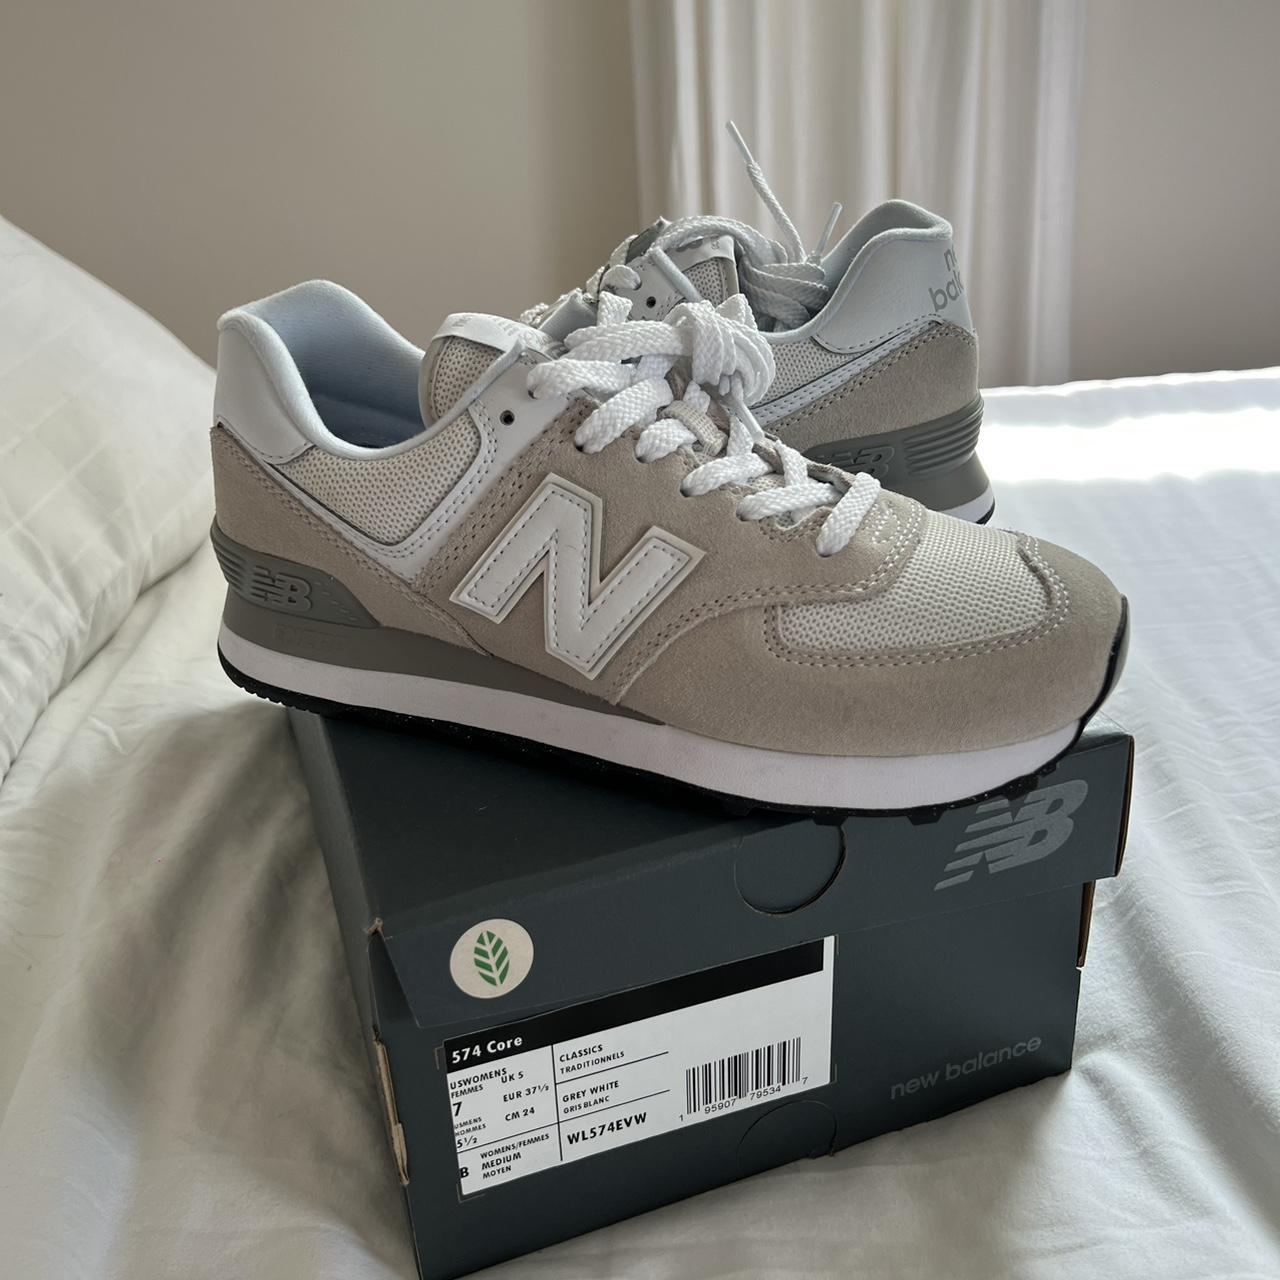 New Balance Women's Grey and White Trainers | Depop